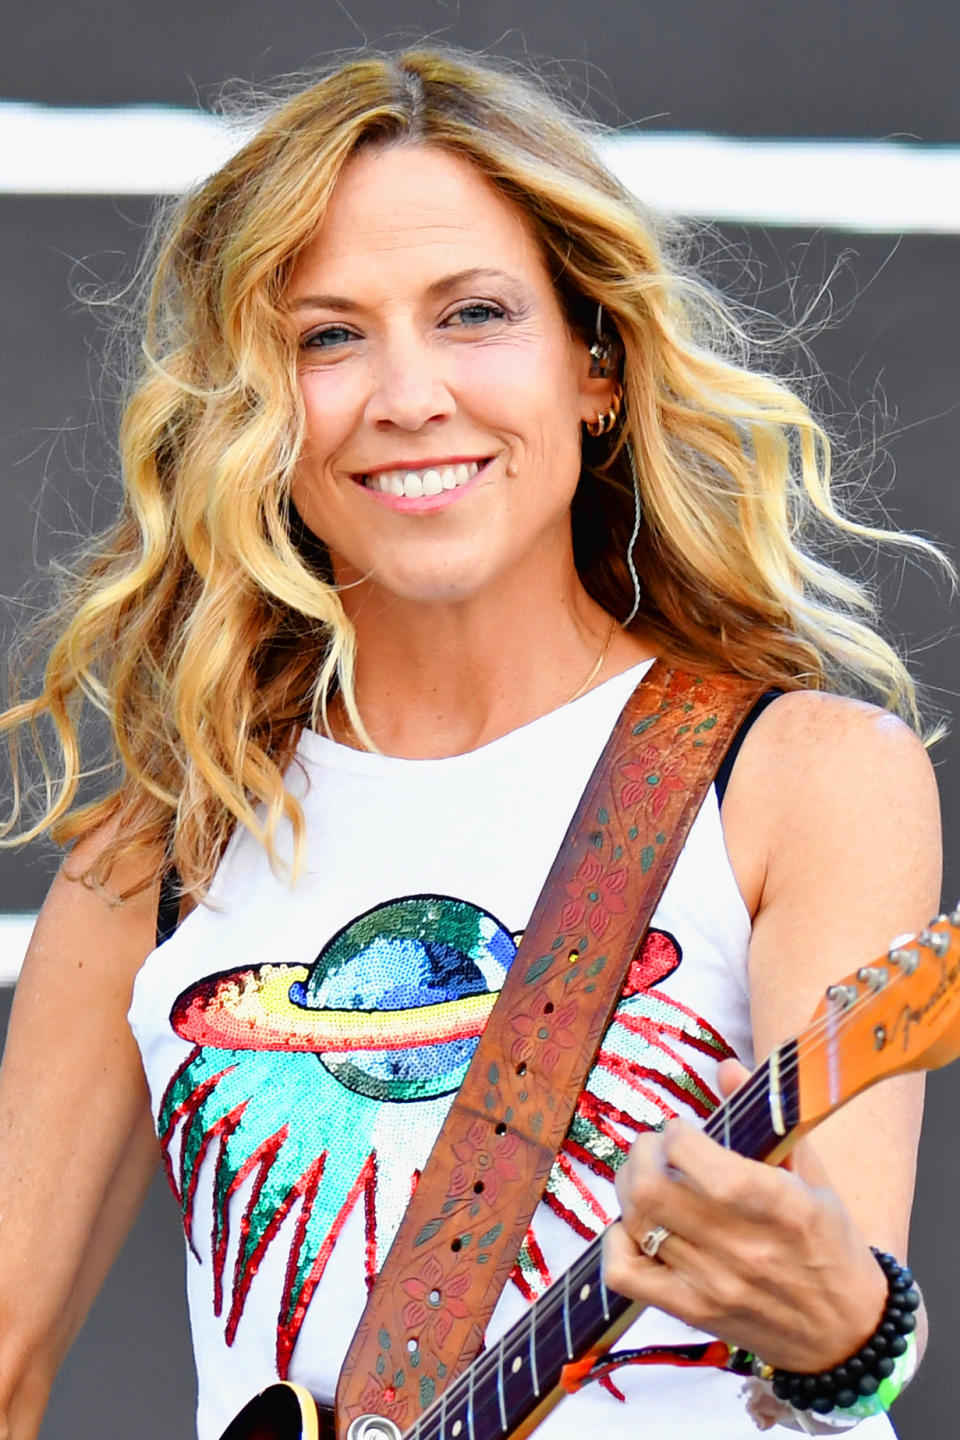 The singer underwent a lumpectomy and seven weeks of radiation before being declared cancer-free in 2006. Two years later, she unveiled the Sheryl Crow Imaging Center in L.A., which features state-of-the-art digital screening and diagnostic technologies for the early detection of breast cancer.